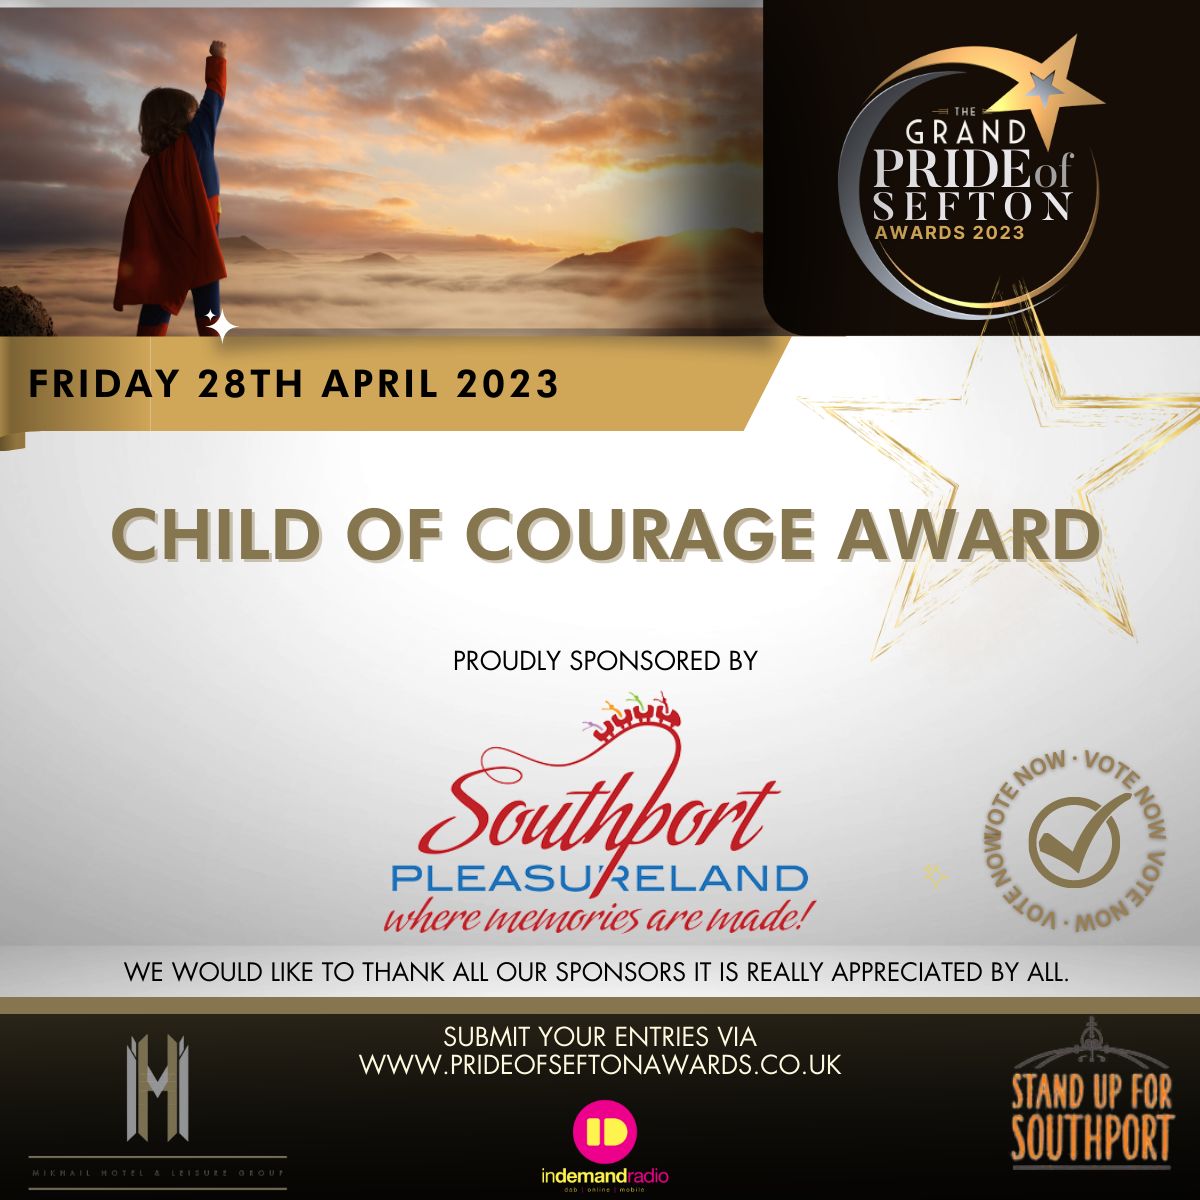 Southport Pleasureland is sponsoring the Child Of Courage Award at the 2023 Pride Of Sefton Awards